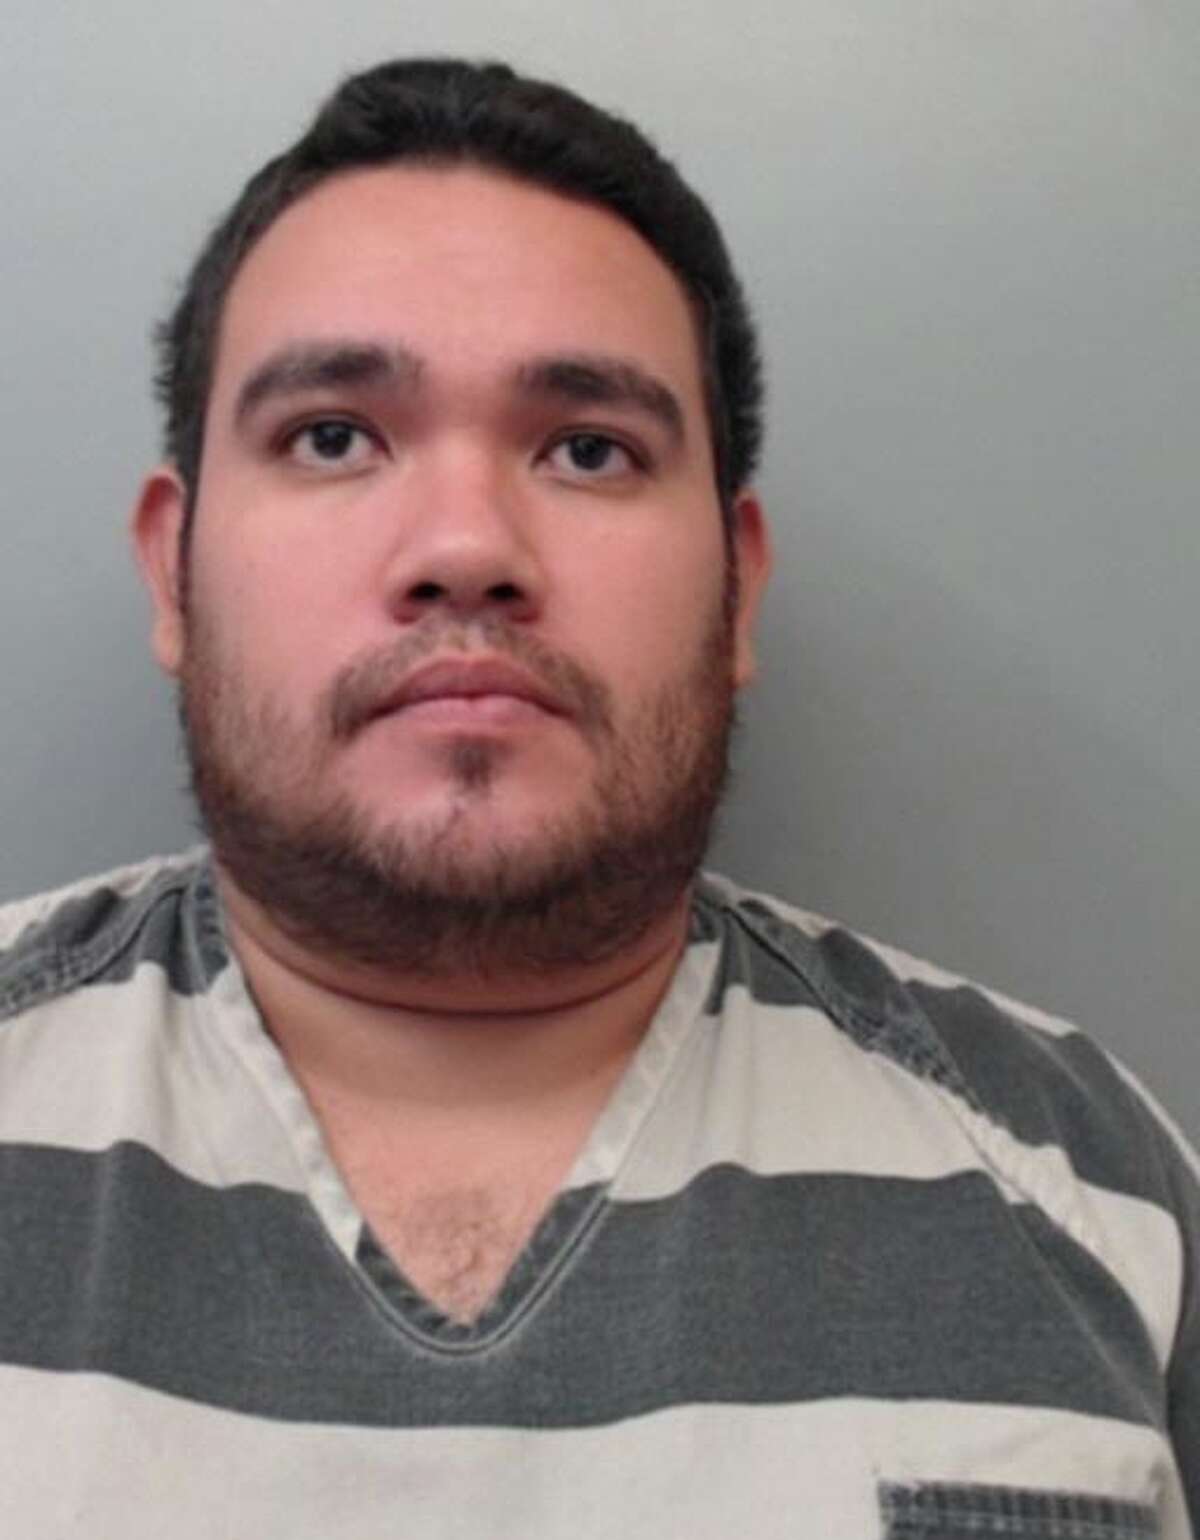 Rene Peña, 29, was charged with theft of materials.